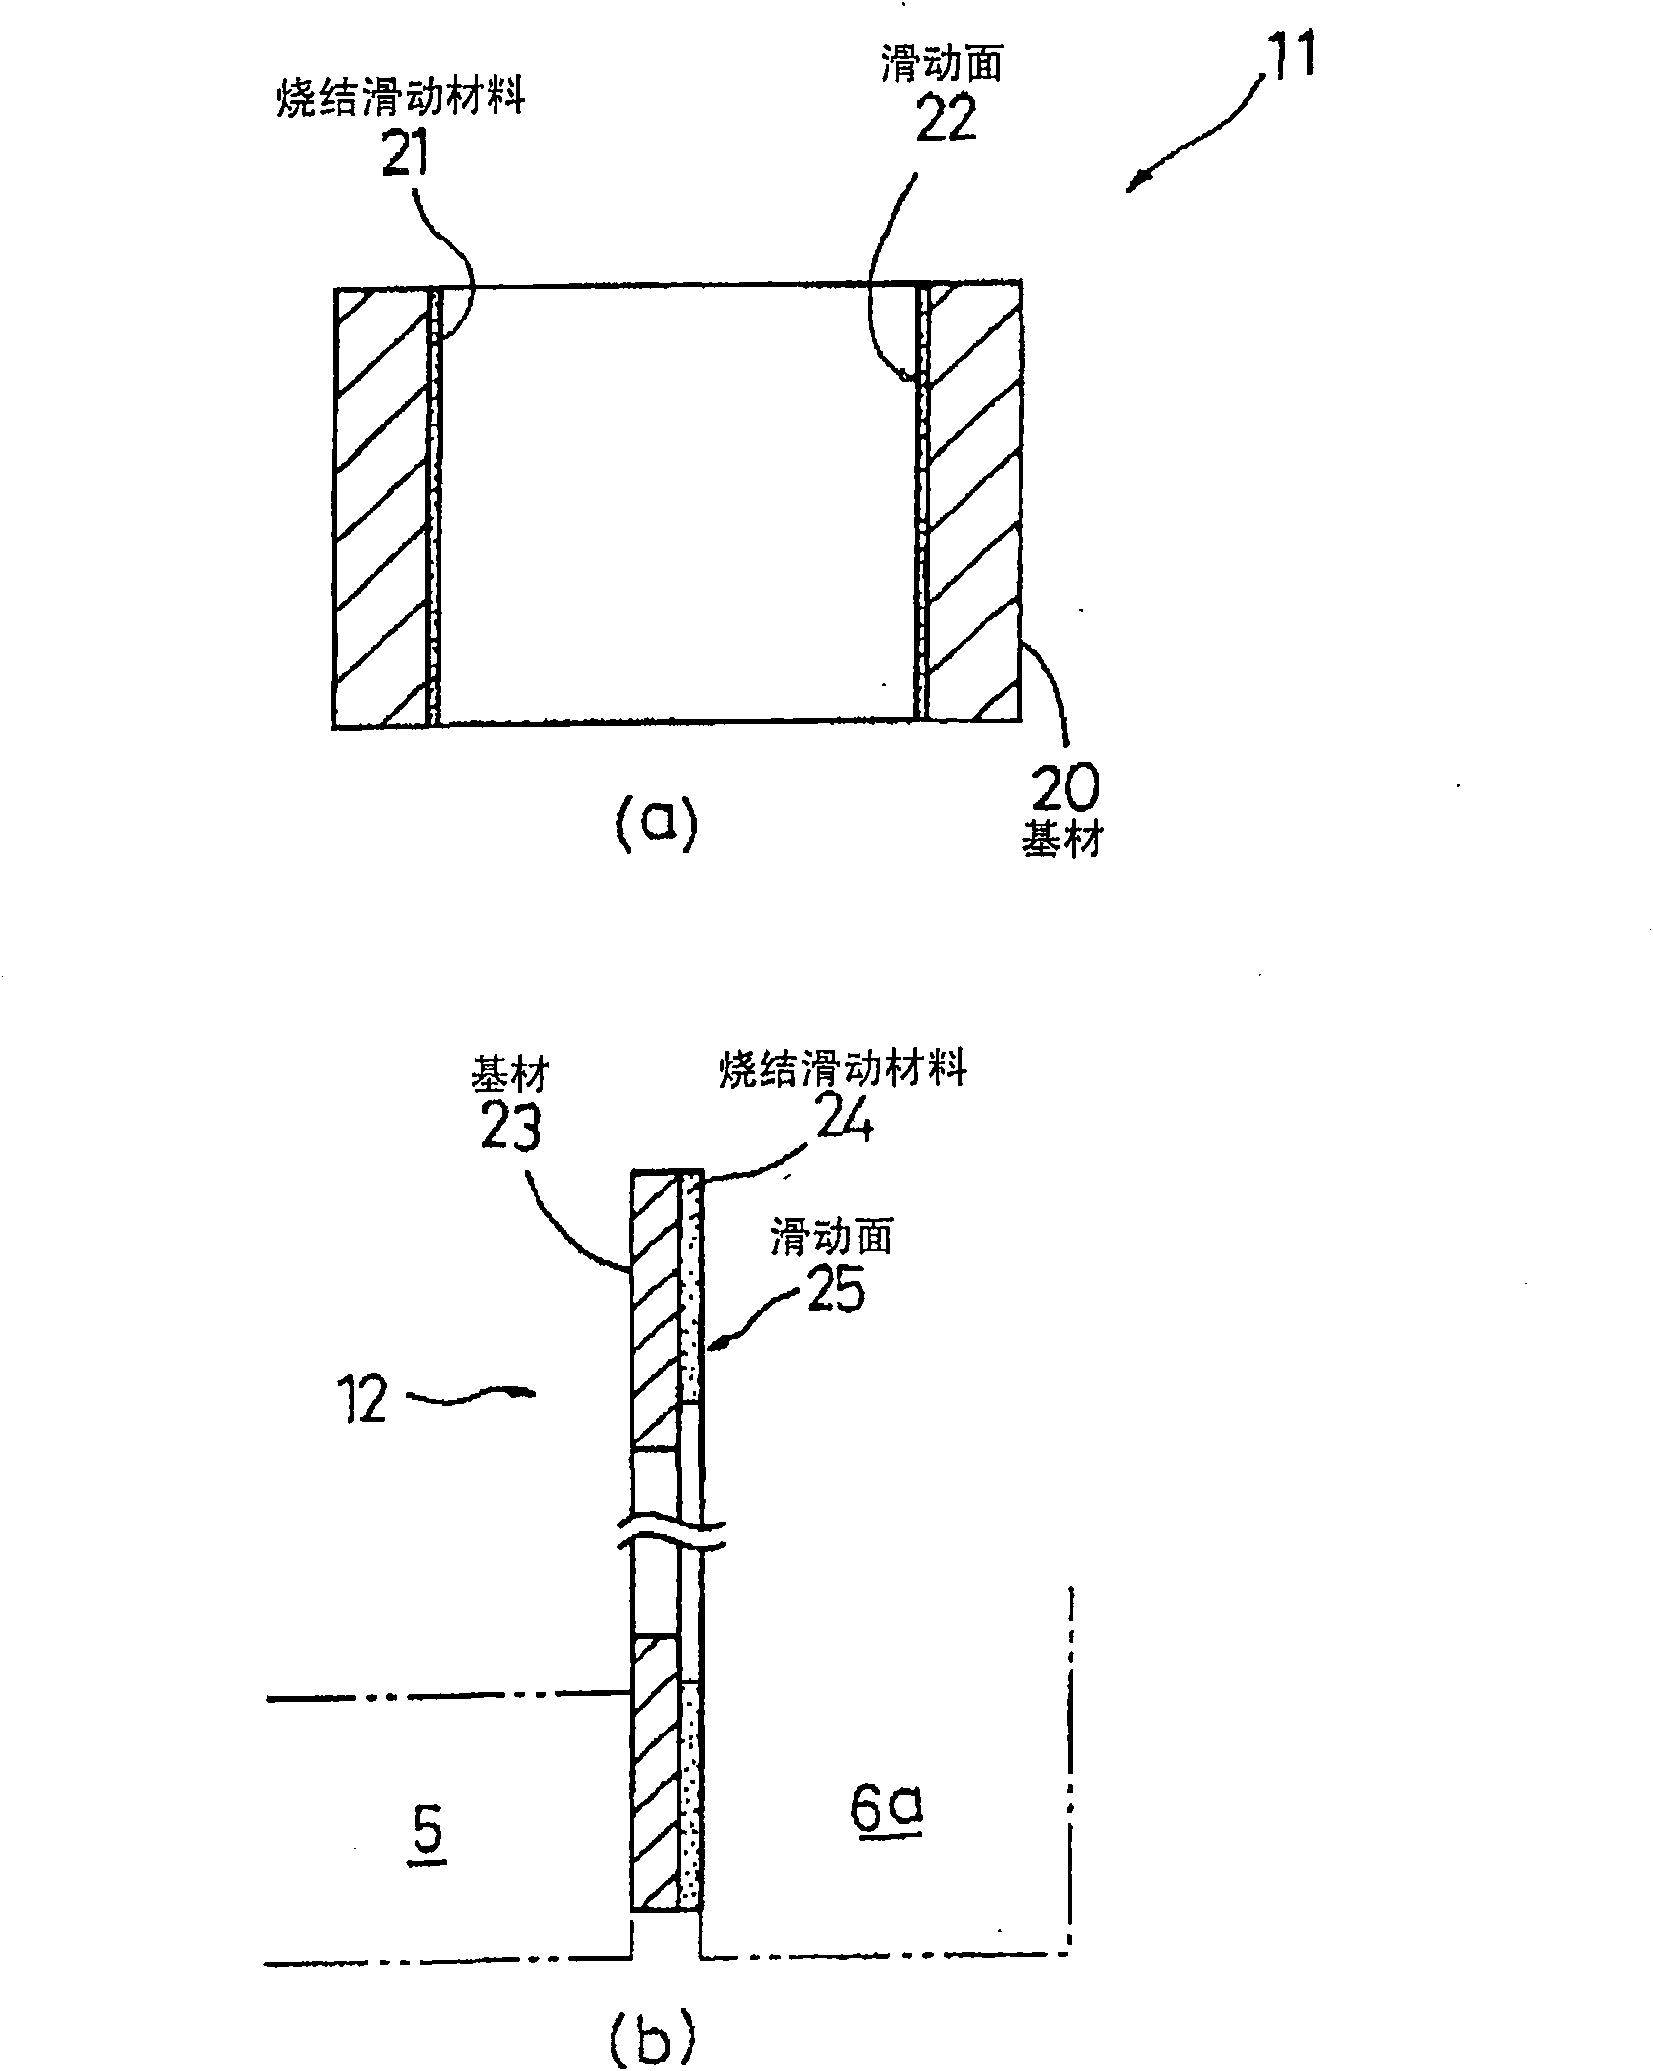 Sintered sliding material, sliding member, connection device and device provided with sliding member